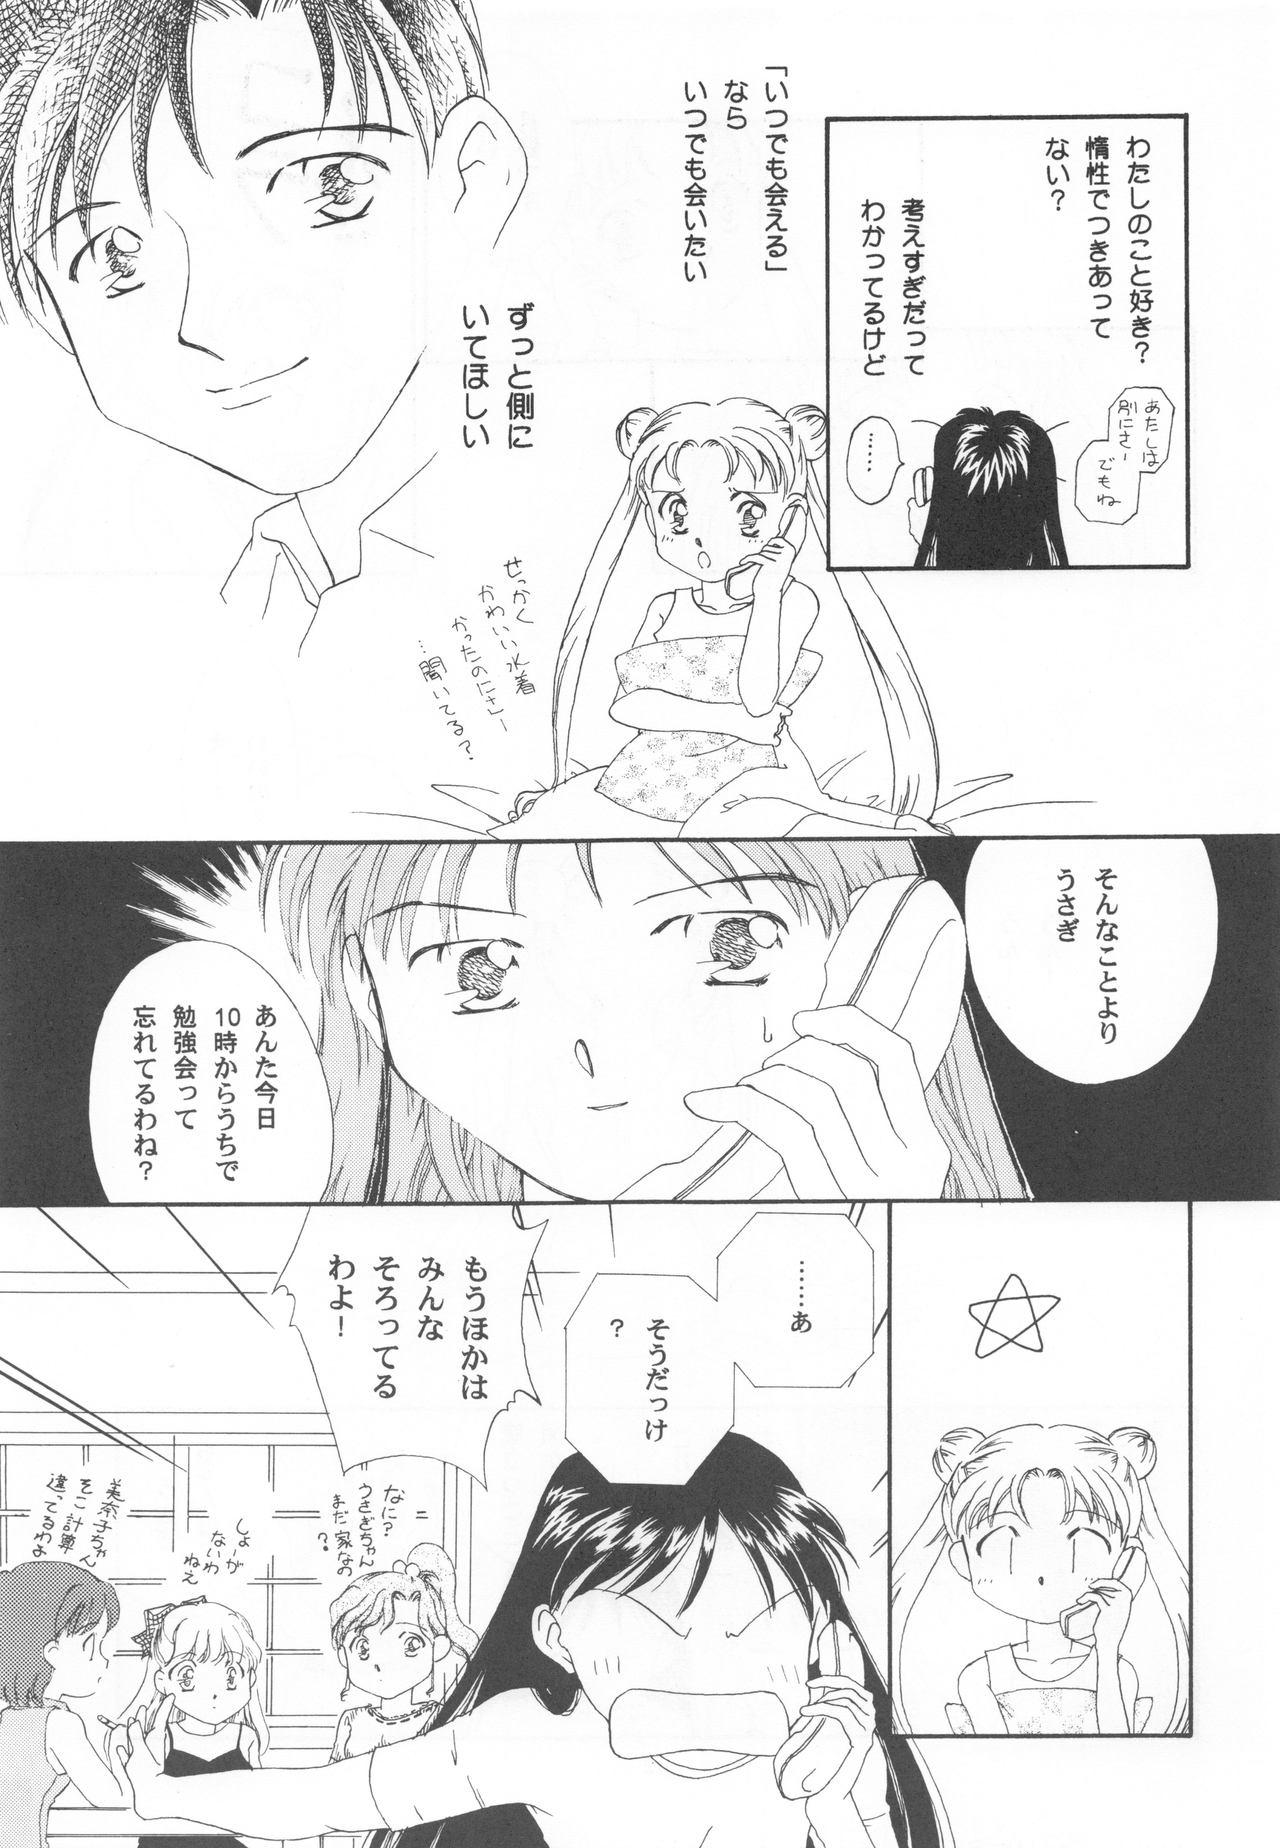 Ass To Mouth Be My Diamond! - Sailor moon Raw - Page 10